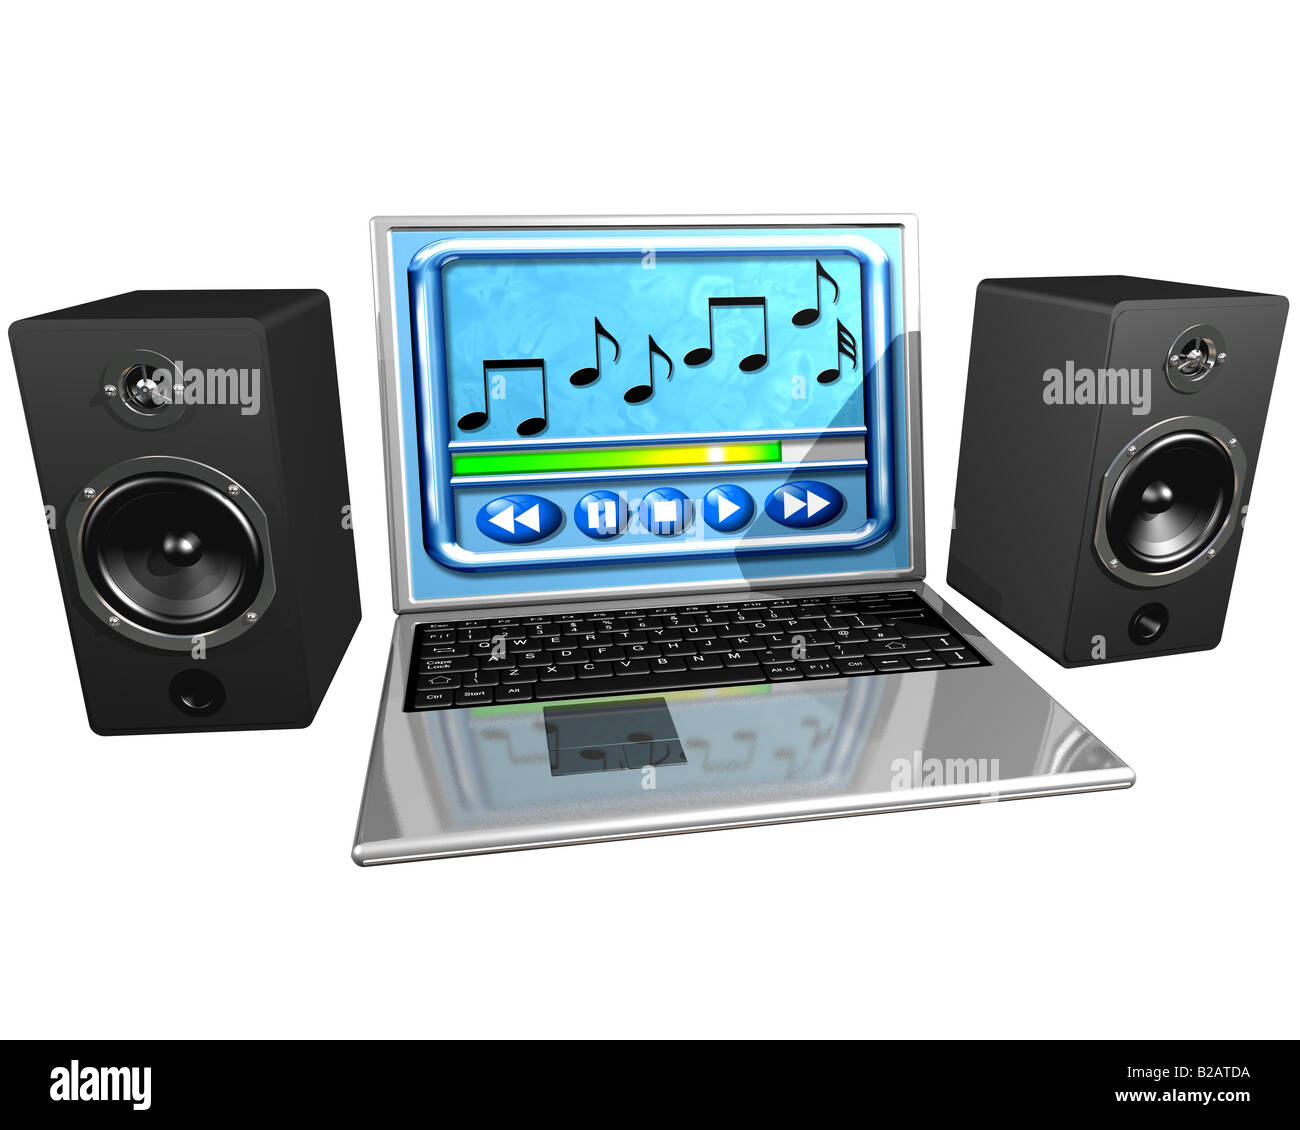 Isolated illustration of a laptop computer and speakers playing music Stock Photo